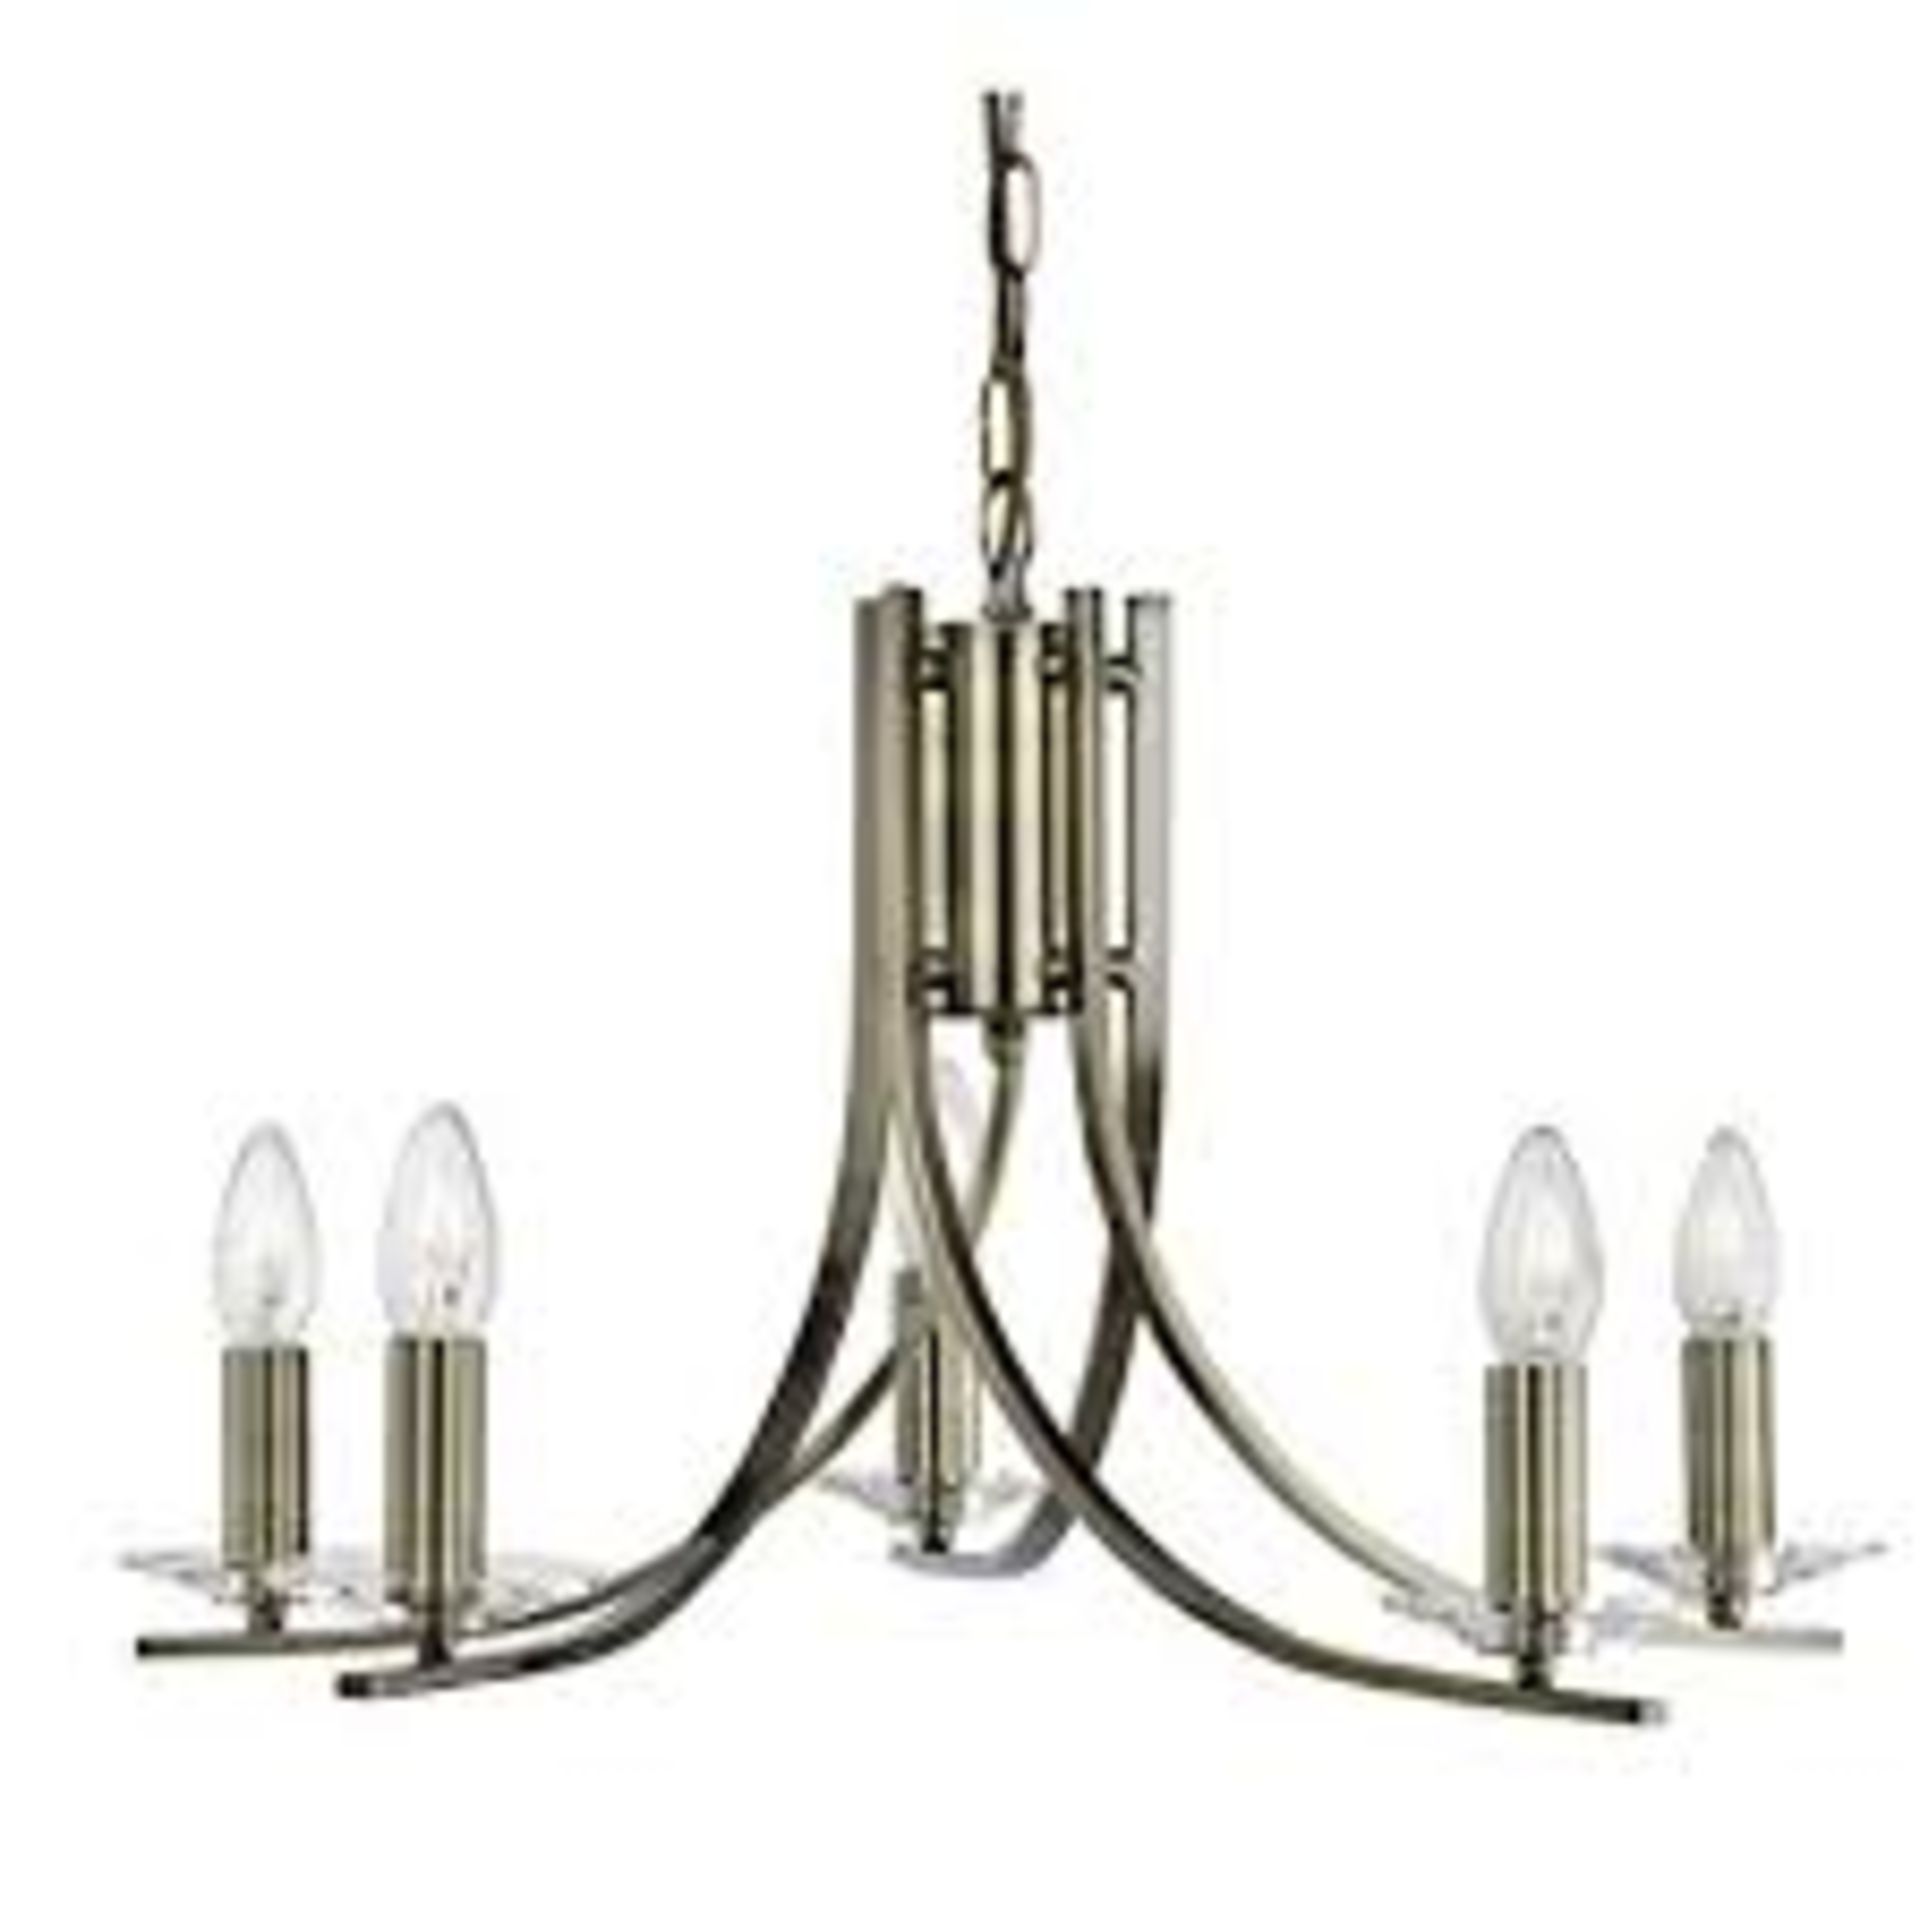 Boxed Searchlight 5 Light Twist Ceiling Pendant RRP £55 (Public Viewing and Appraisals Available)